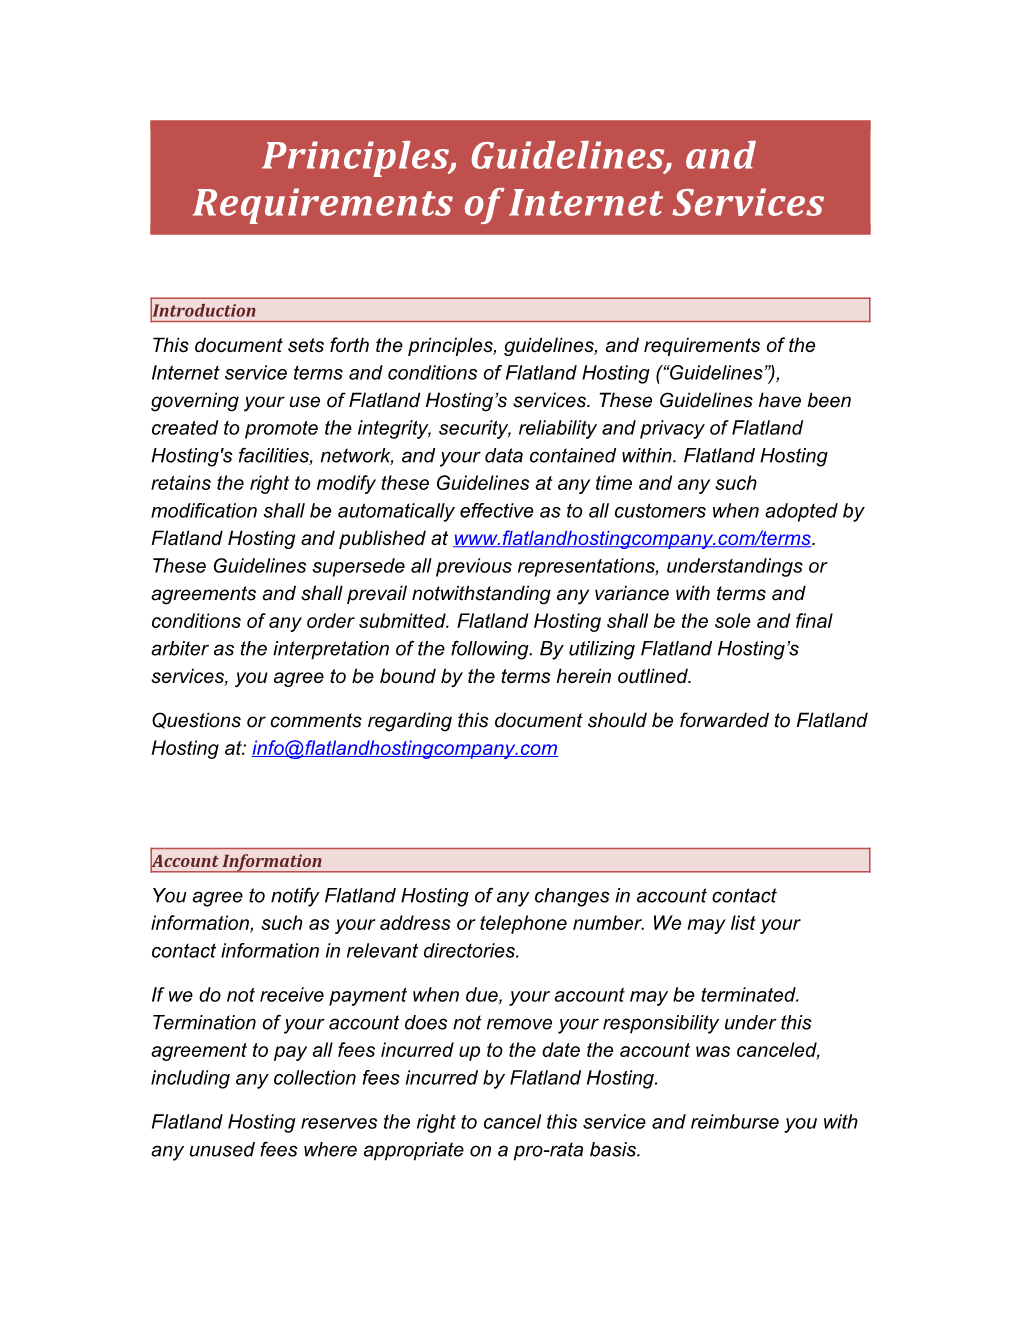 Principles, Guidelines, and Requirements of Internet Services